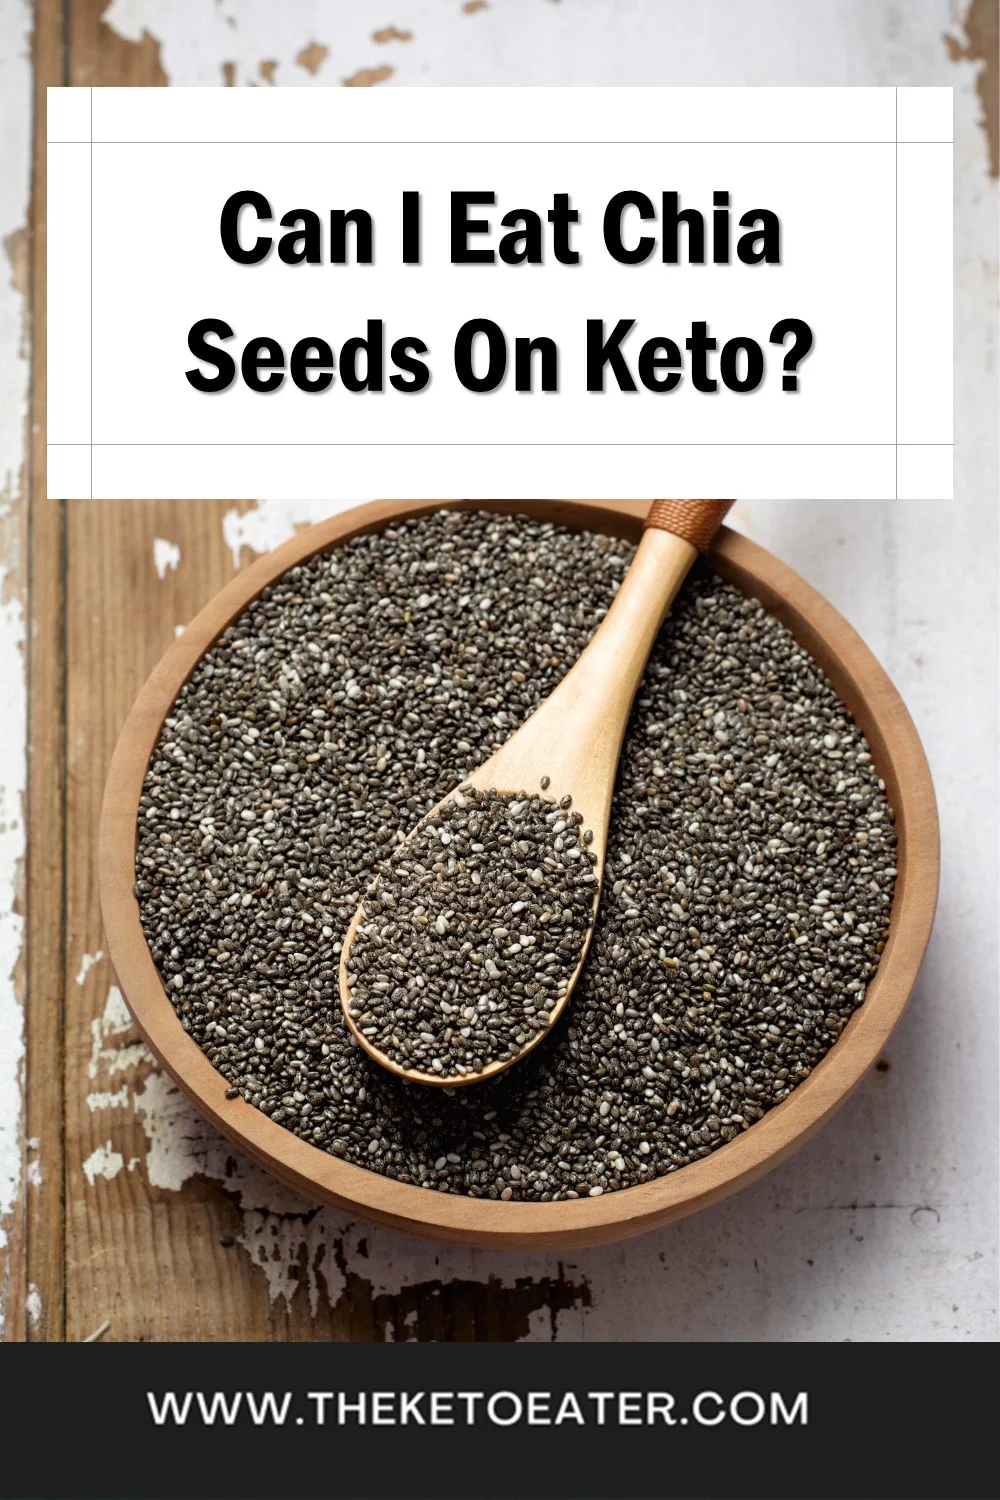 Can You Eat Chia Seeds On Keto? - The Keto Eater